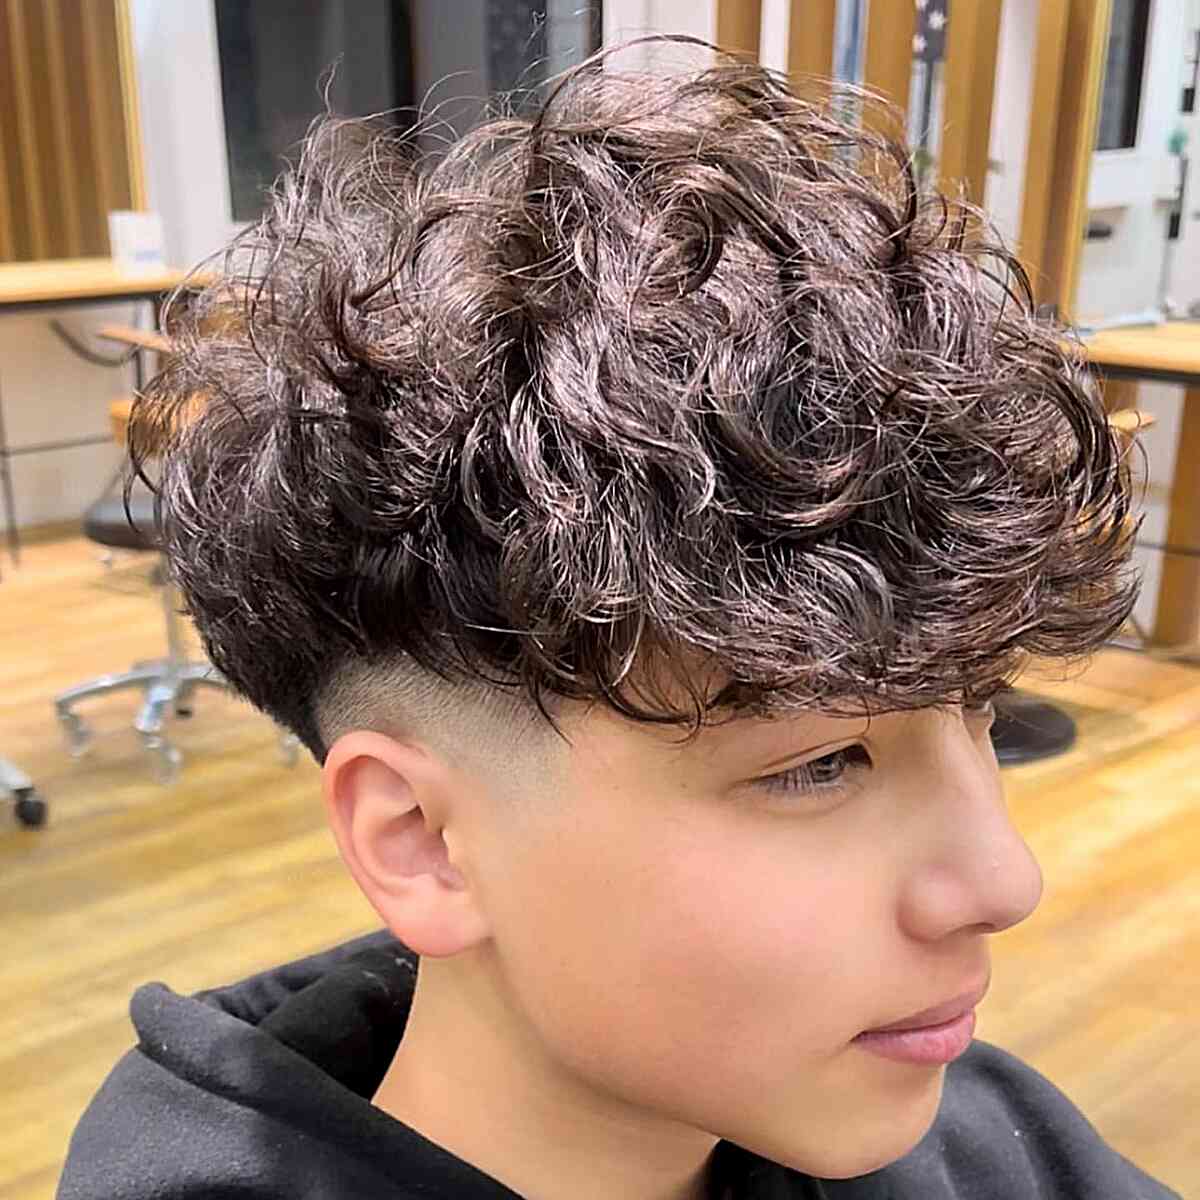 Thick and Messy Curls for Younger Guys with a bald fade and undercut